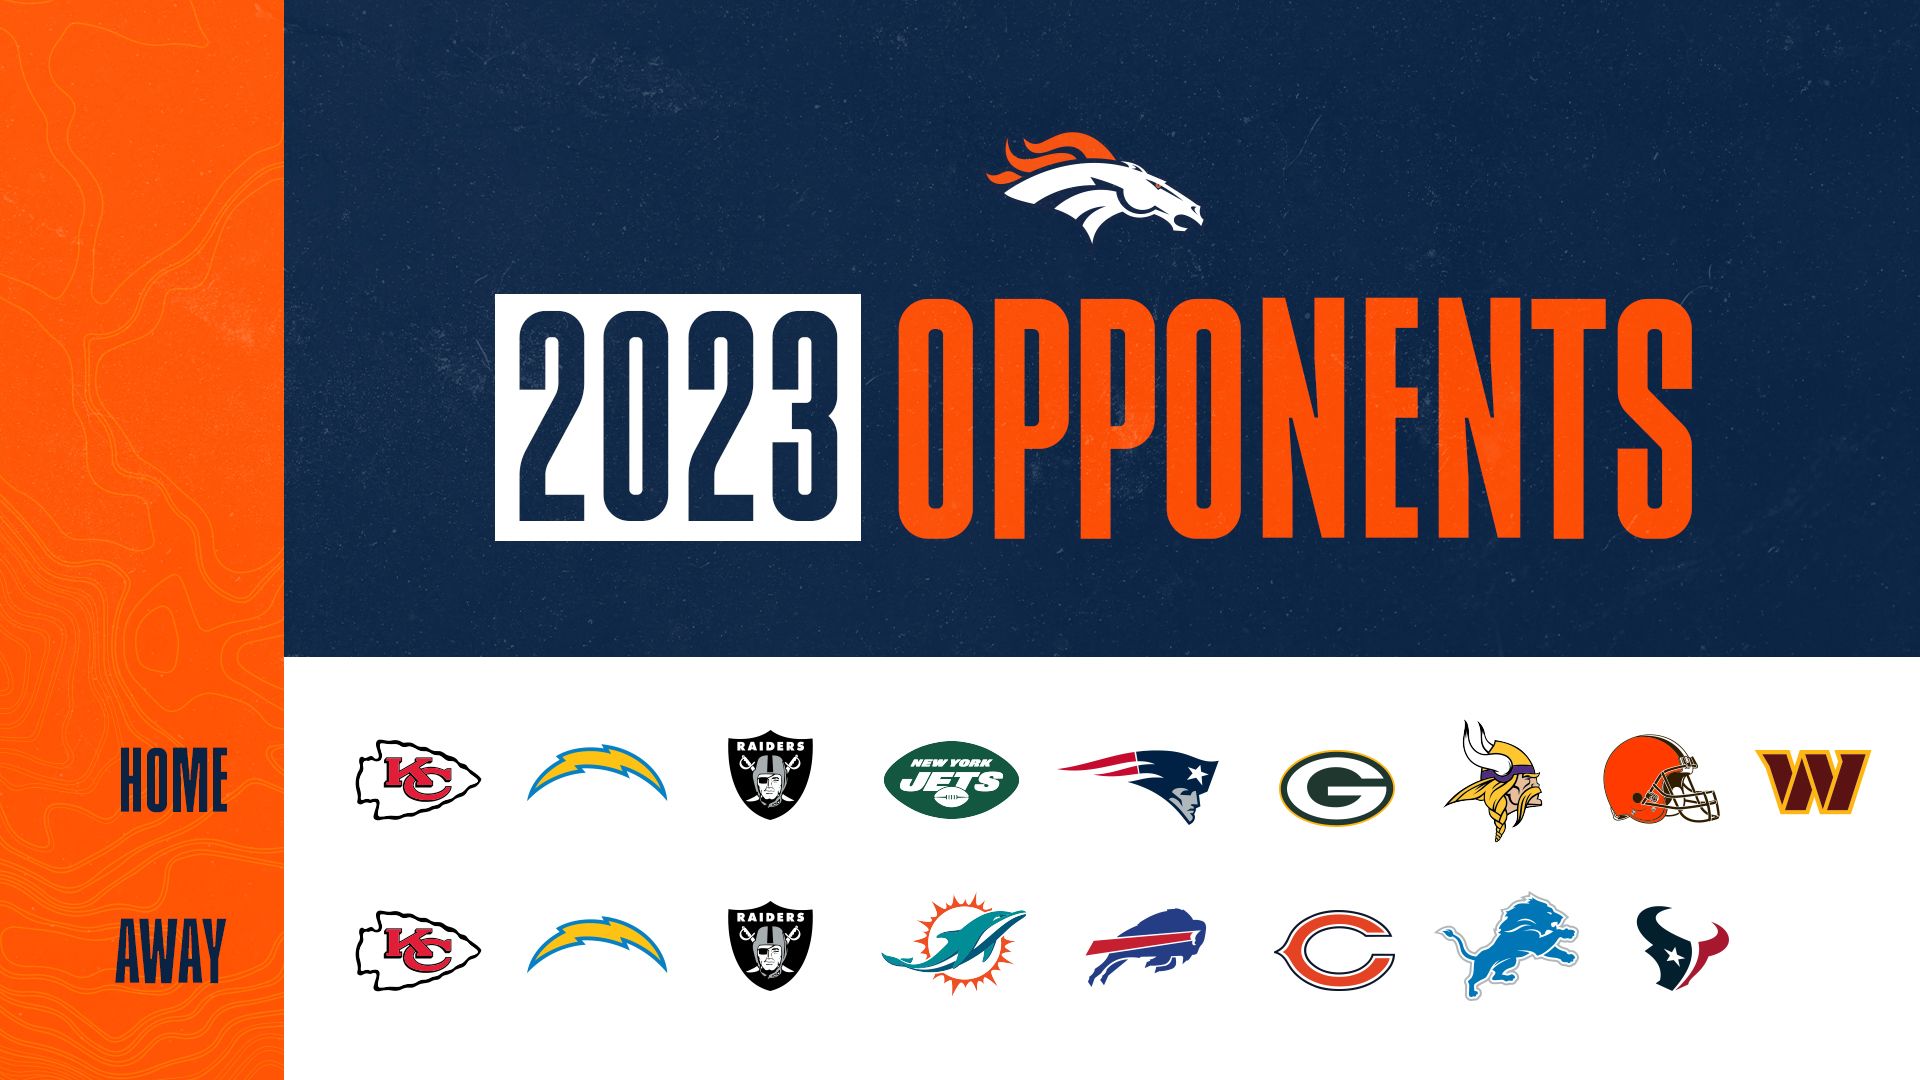 Meet the New York Jets' 2023 opponents